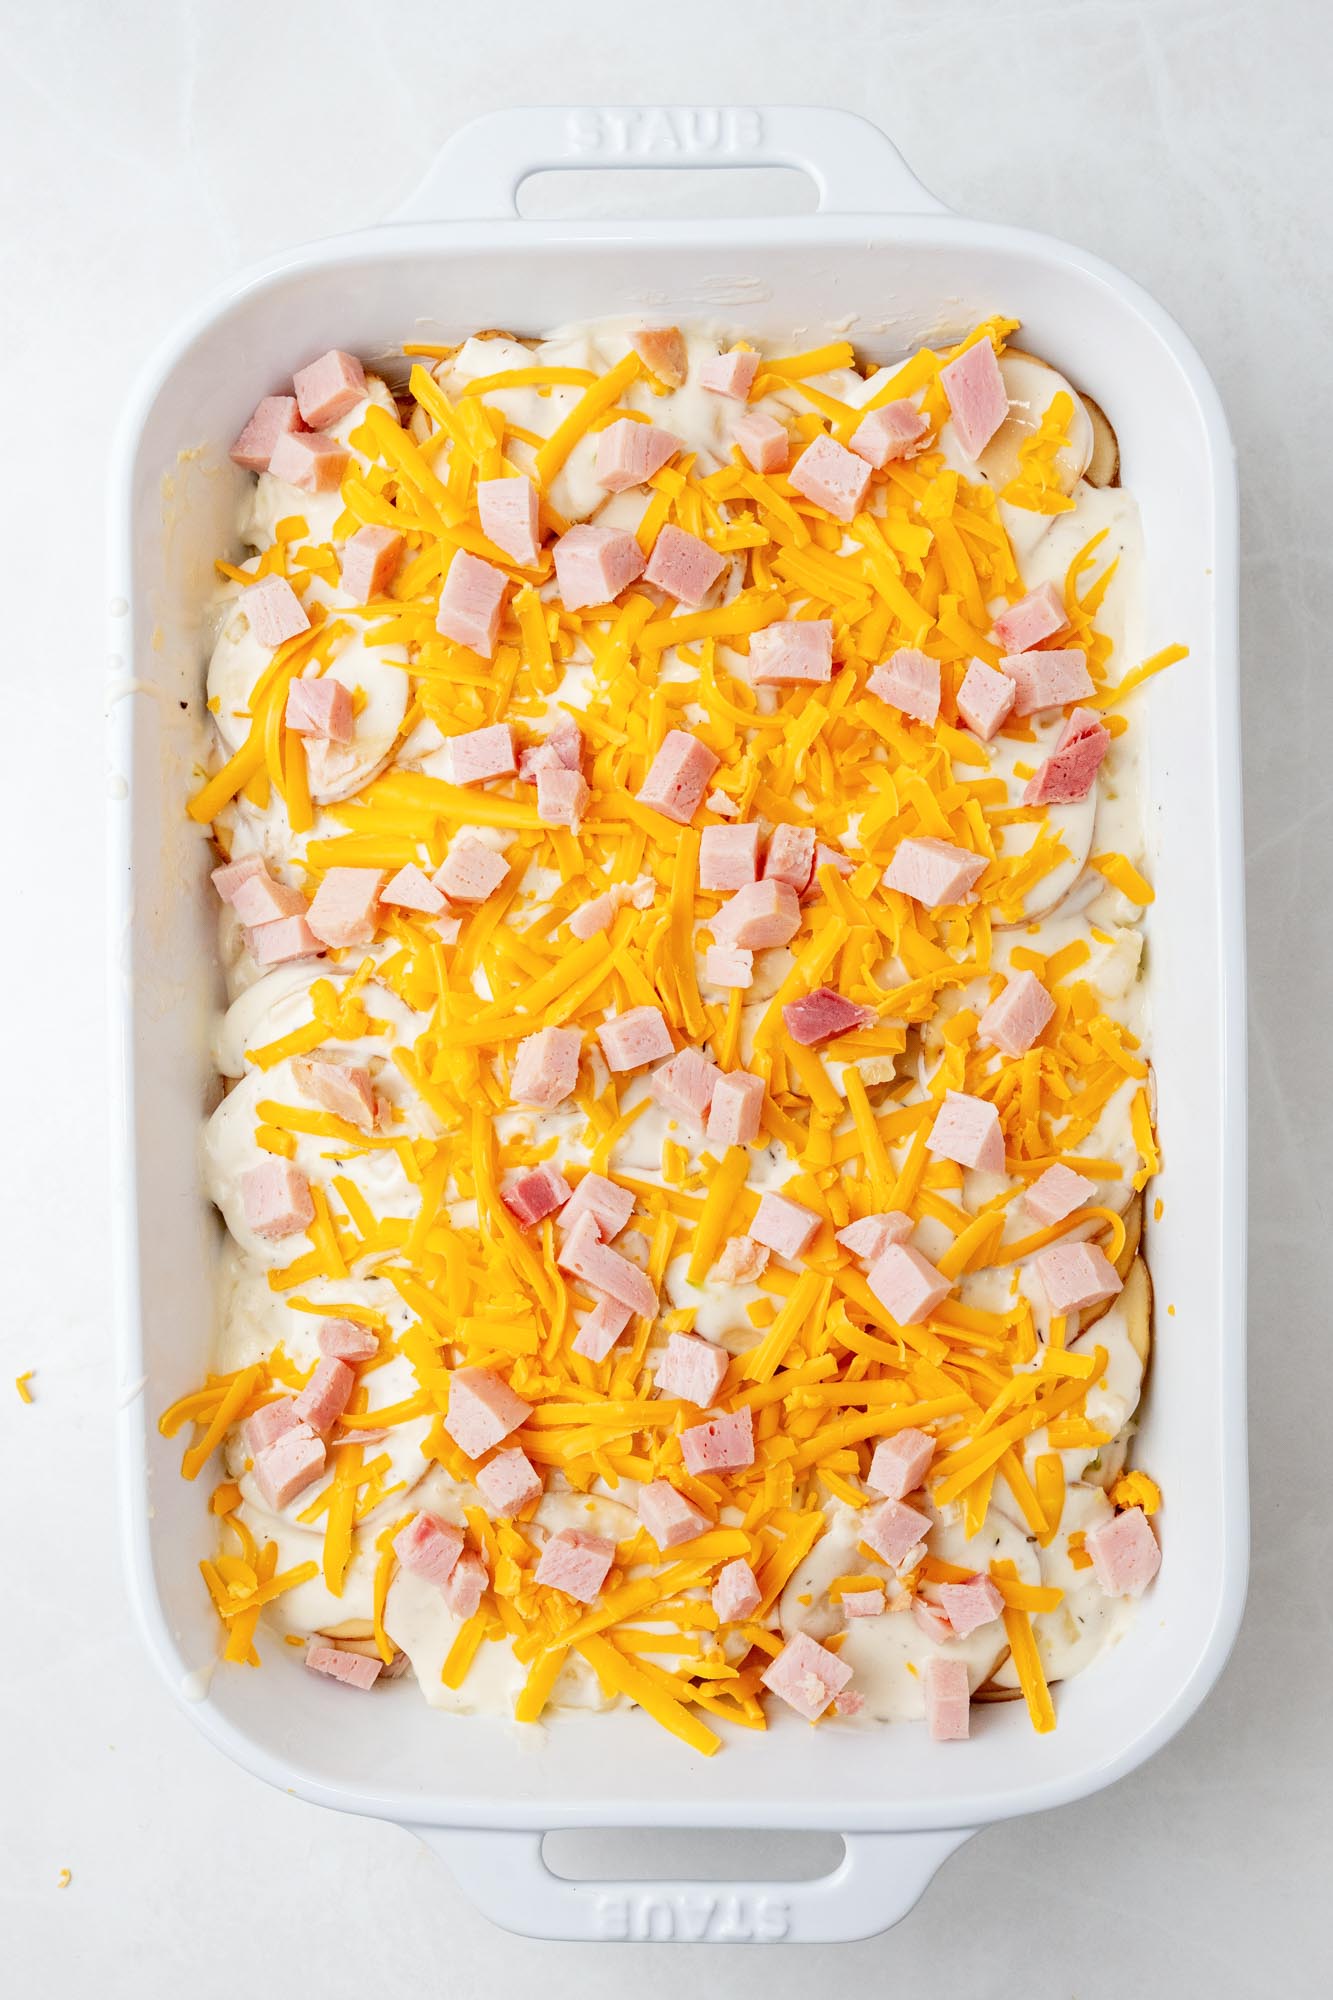 scalloped potatoes topped with diced ham and shredded cheese, before baking.